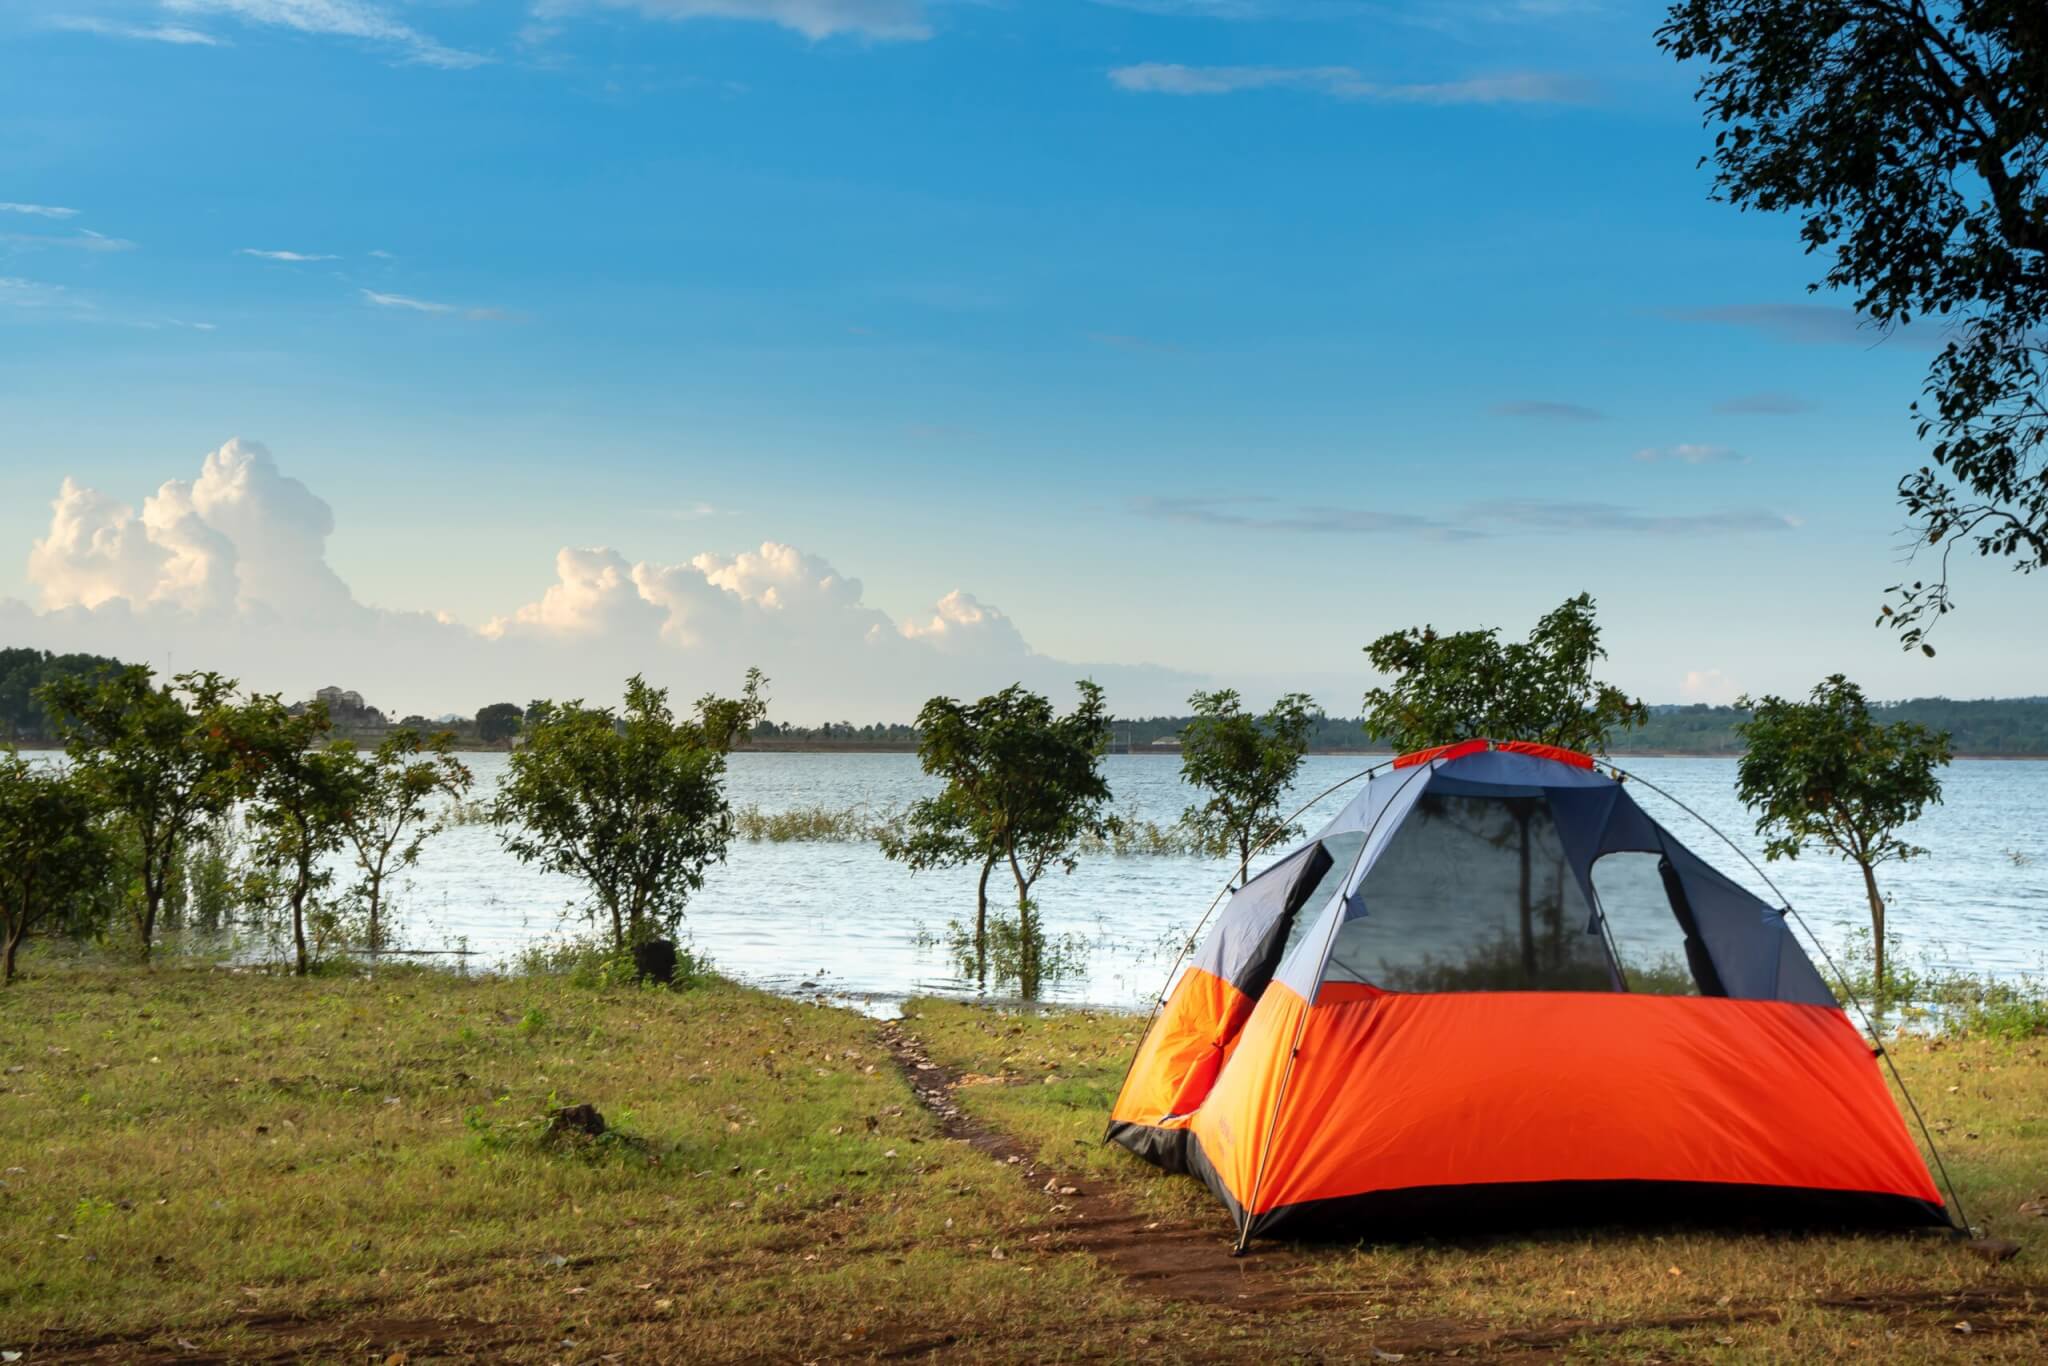 camping dome tent near water, best tents